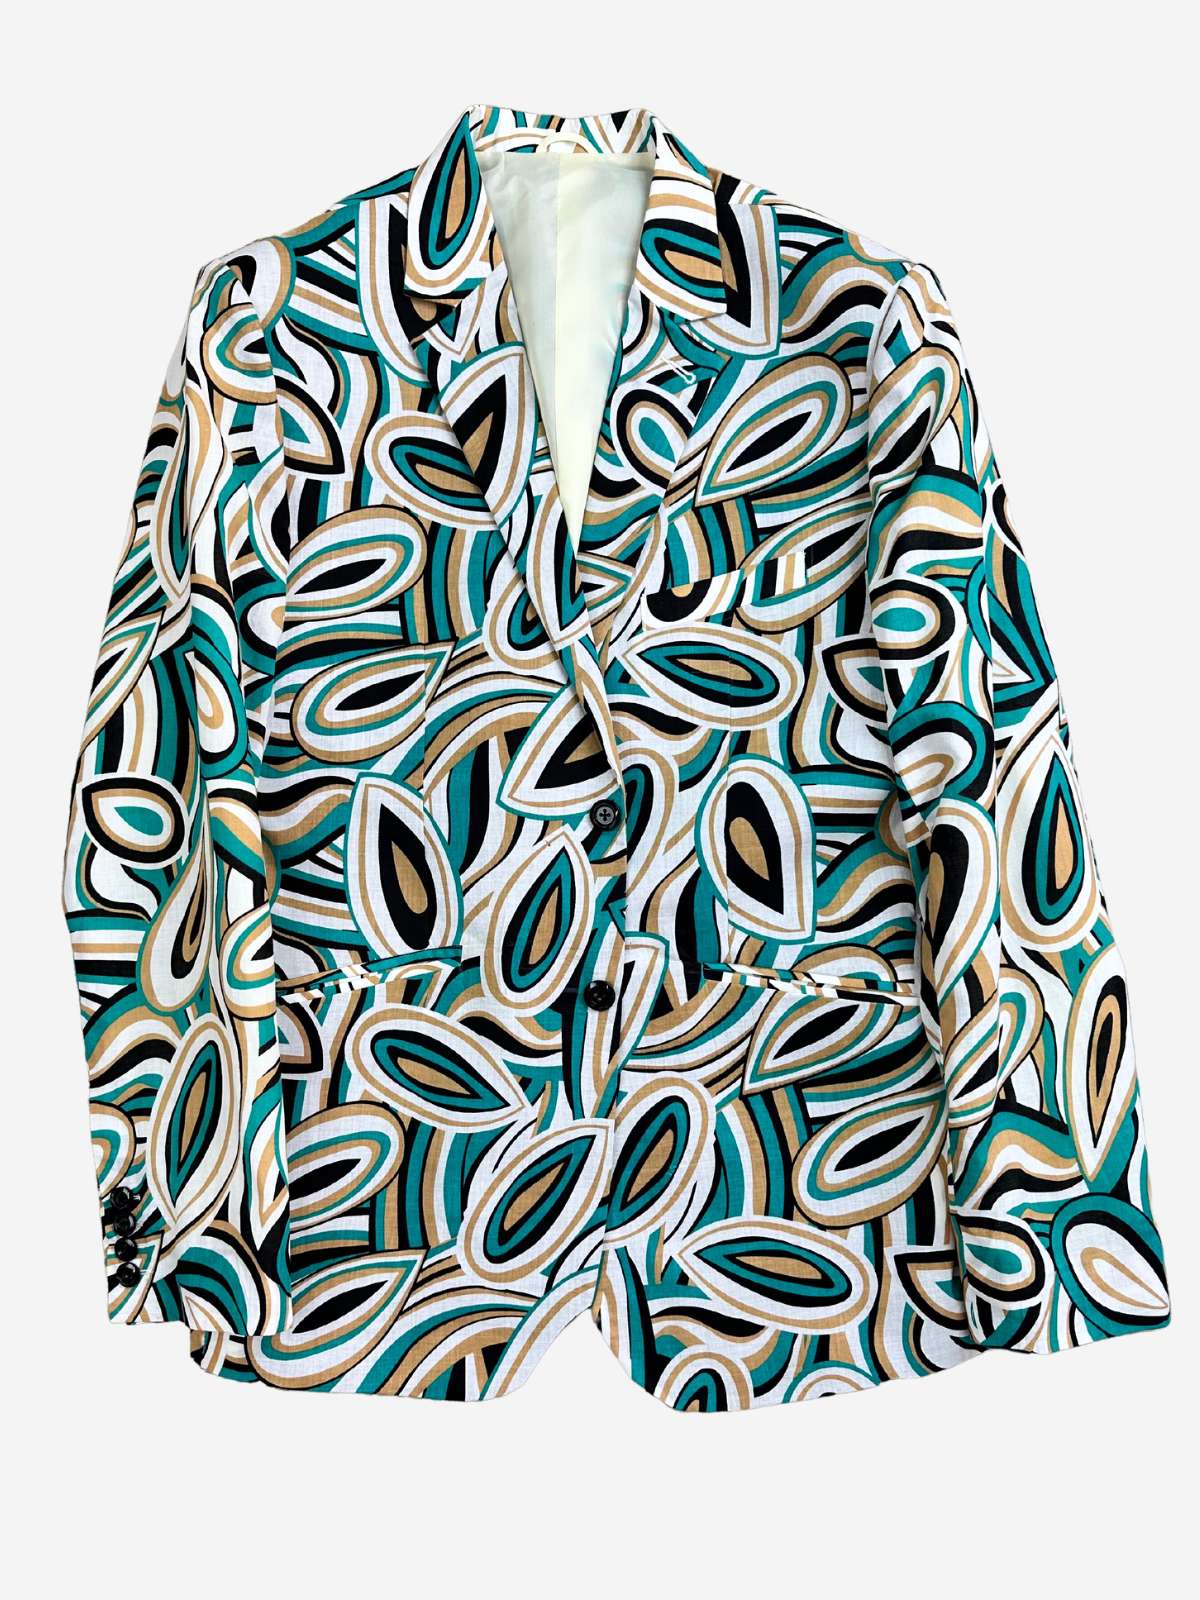 Avocado Abstract Cotton Voile Jacket - Green/Beige